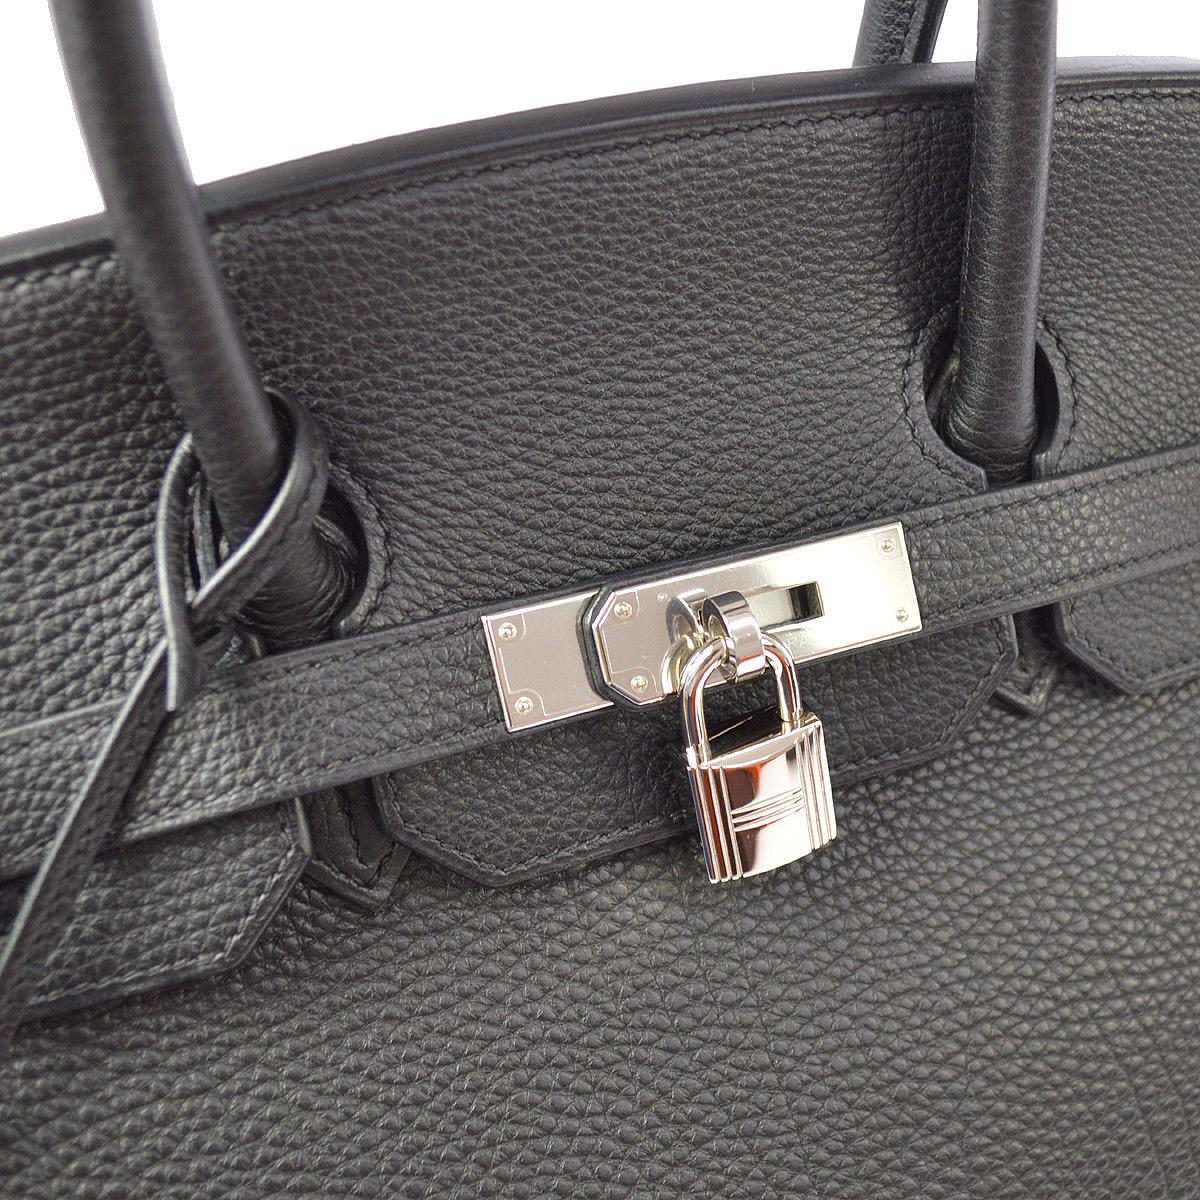 Hermes Birkin 35 Black Leather Palladium Top Handle Satchel Travel Tote Bag in Box

Leather
Palladium tone hardware
Leather lining
Date code present
Made in France
Handle drop 4